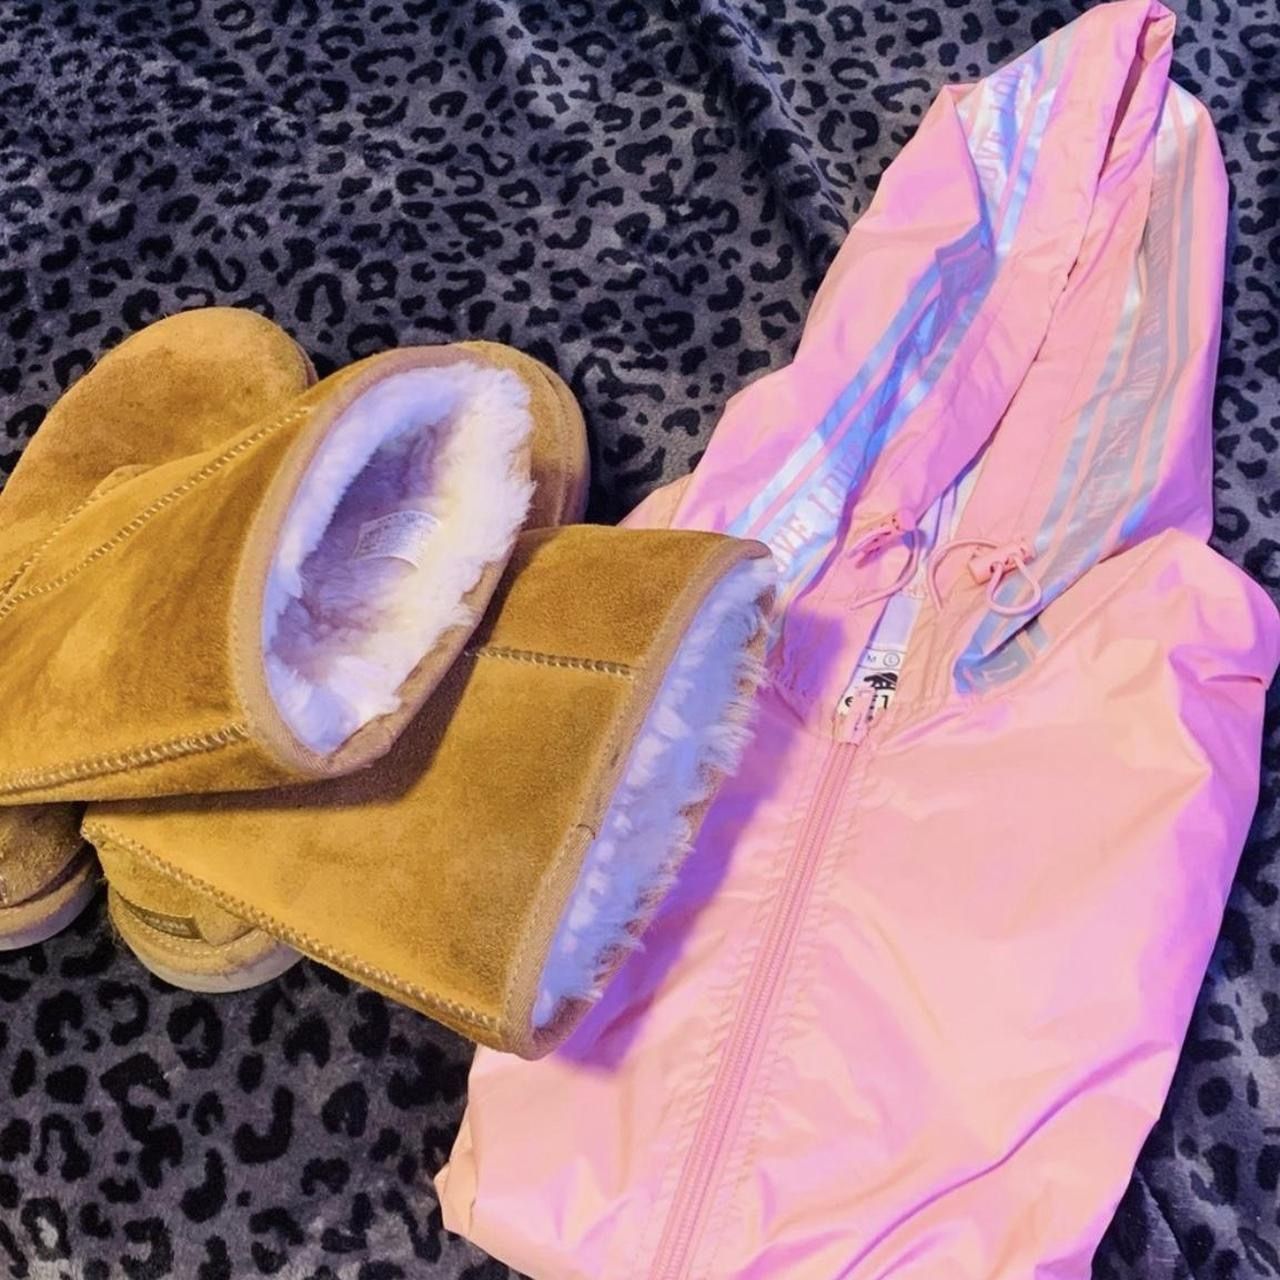 UGG boots And Brand(pink) windbreaker